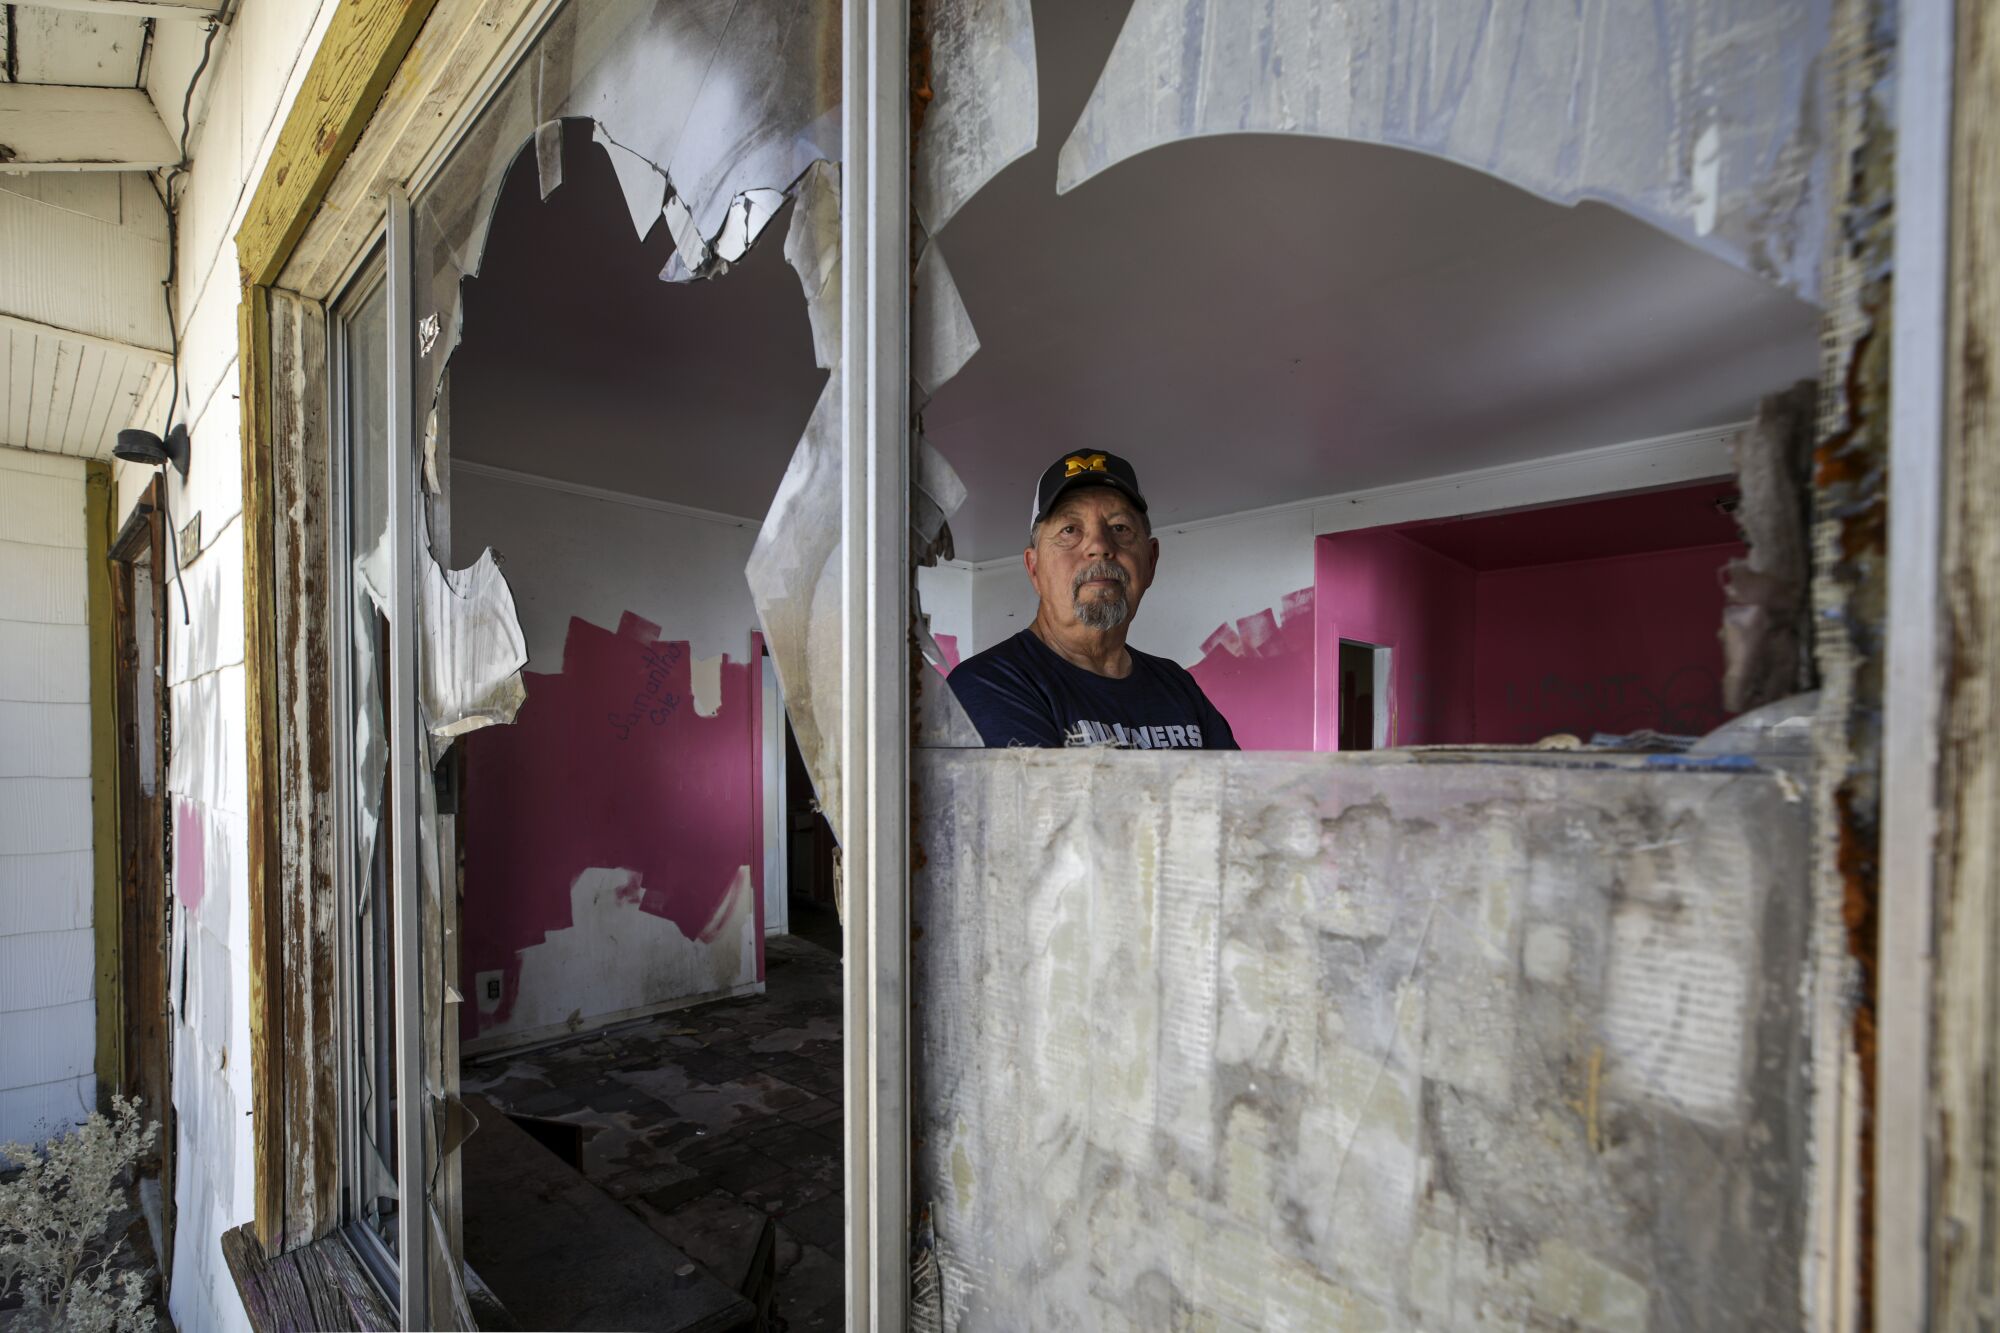 A man stands inside an abandoned home with shattered windows